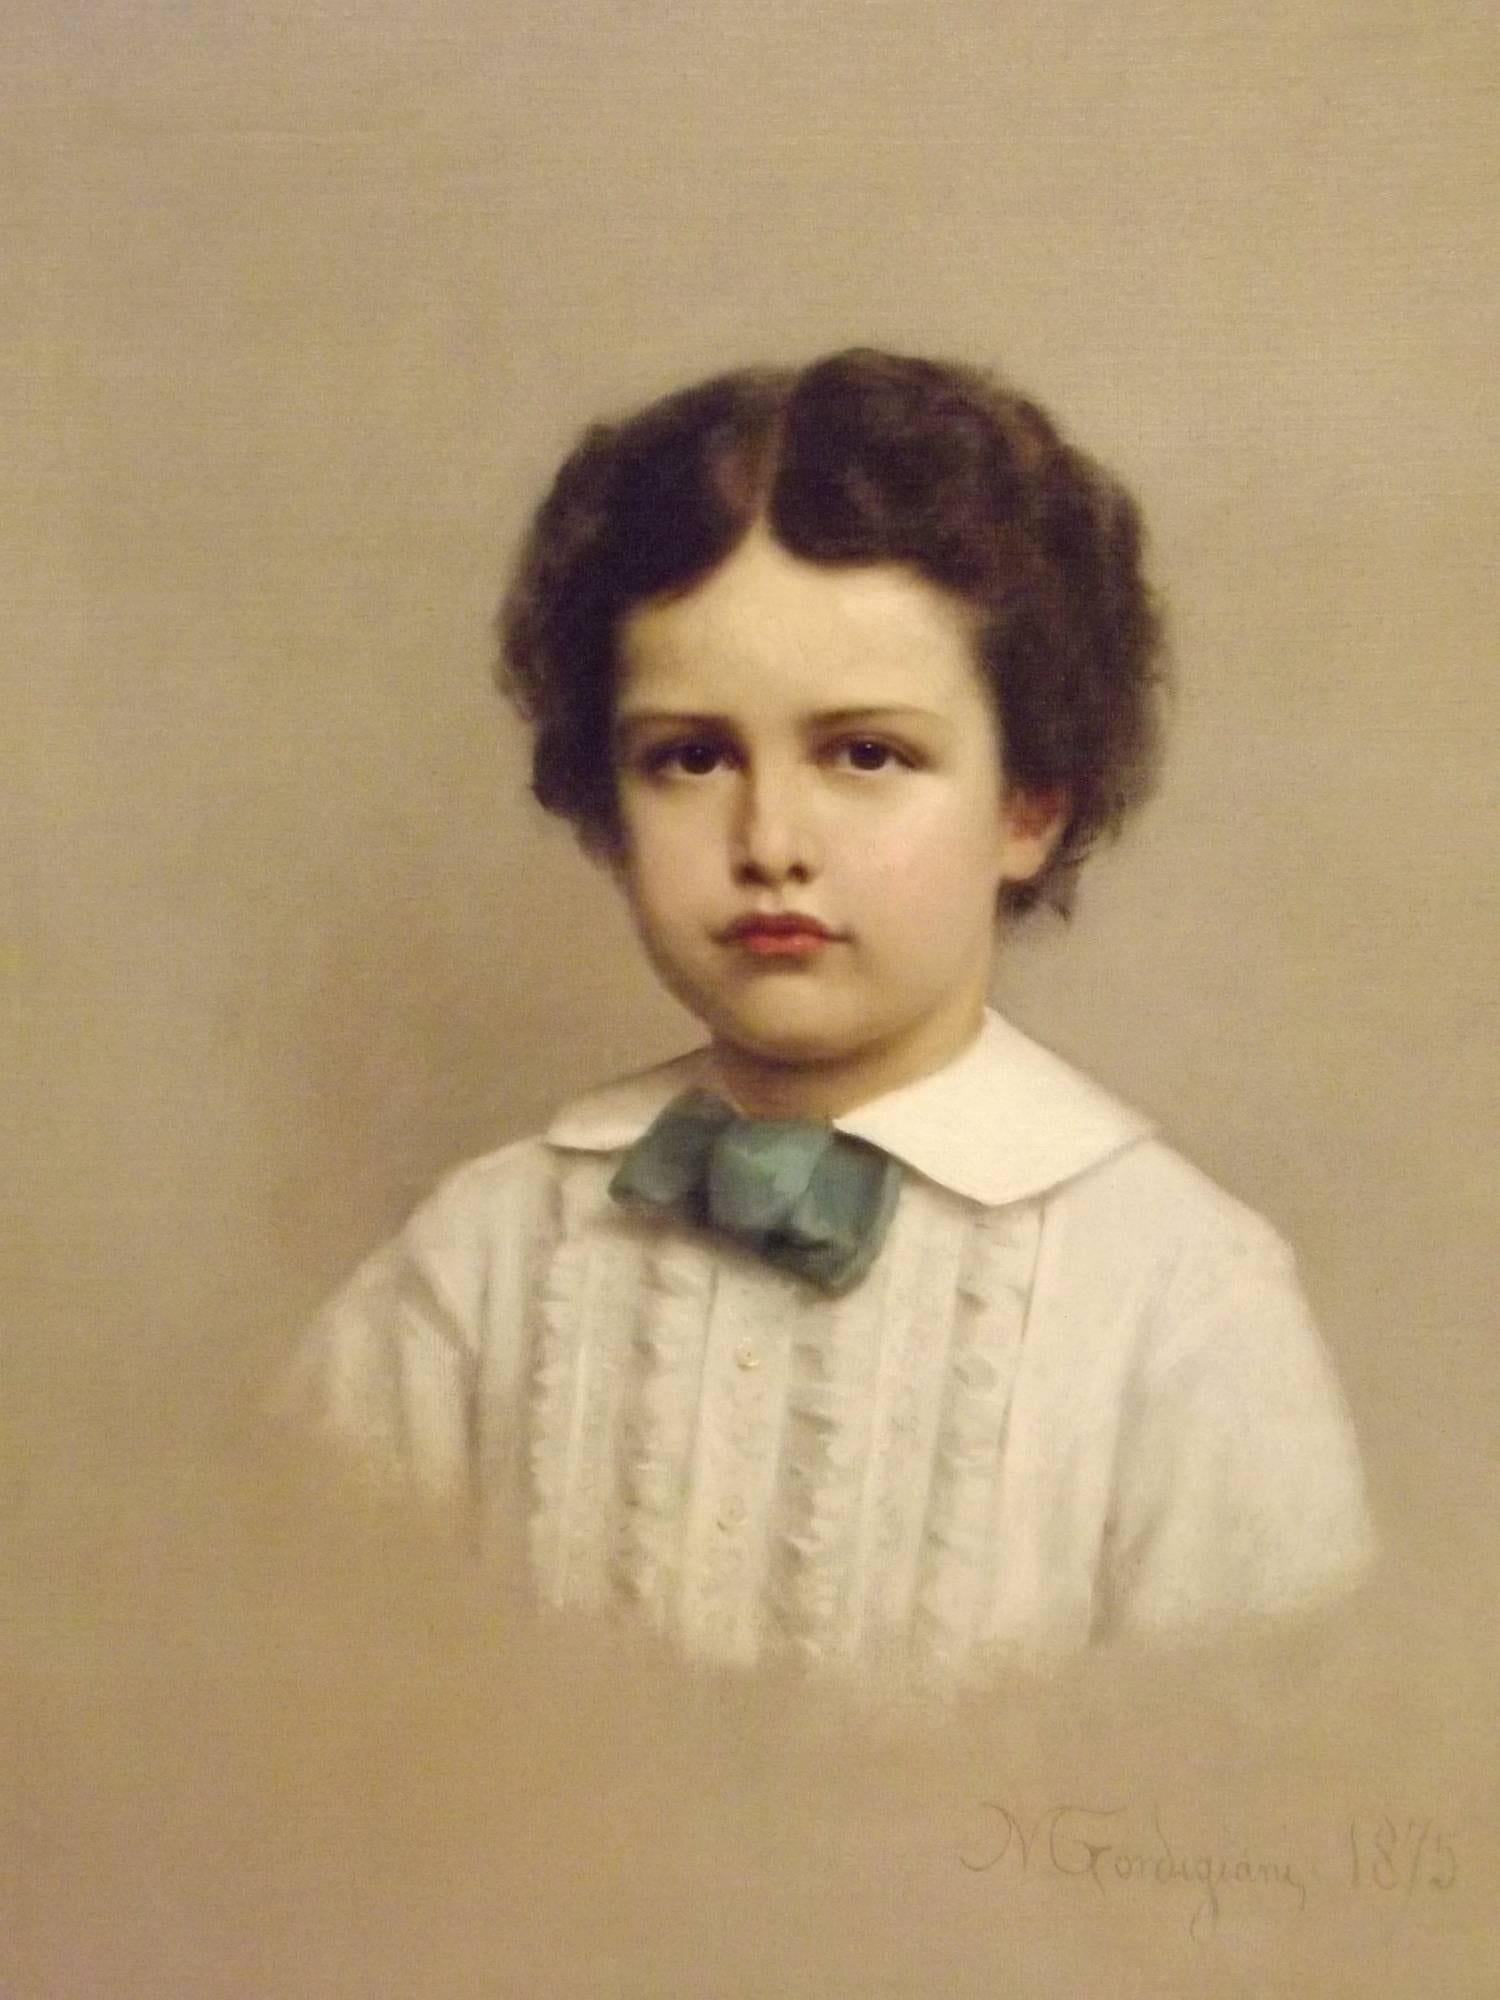 "Portrait of a Boy" by Michele Gordigiani 1830-1909 was a portrait painter and teacher in Florence who regularly exhibited in England and Italy. Oil on canvas, signed 1875.

All of the items that we advertise for sale have been as